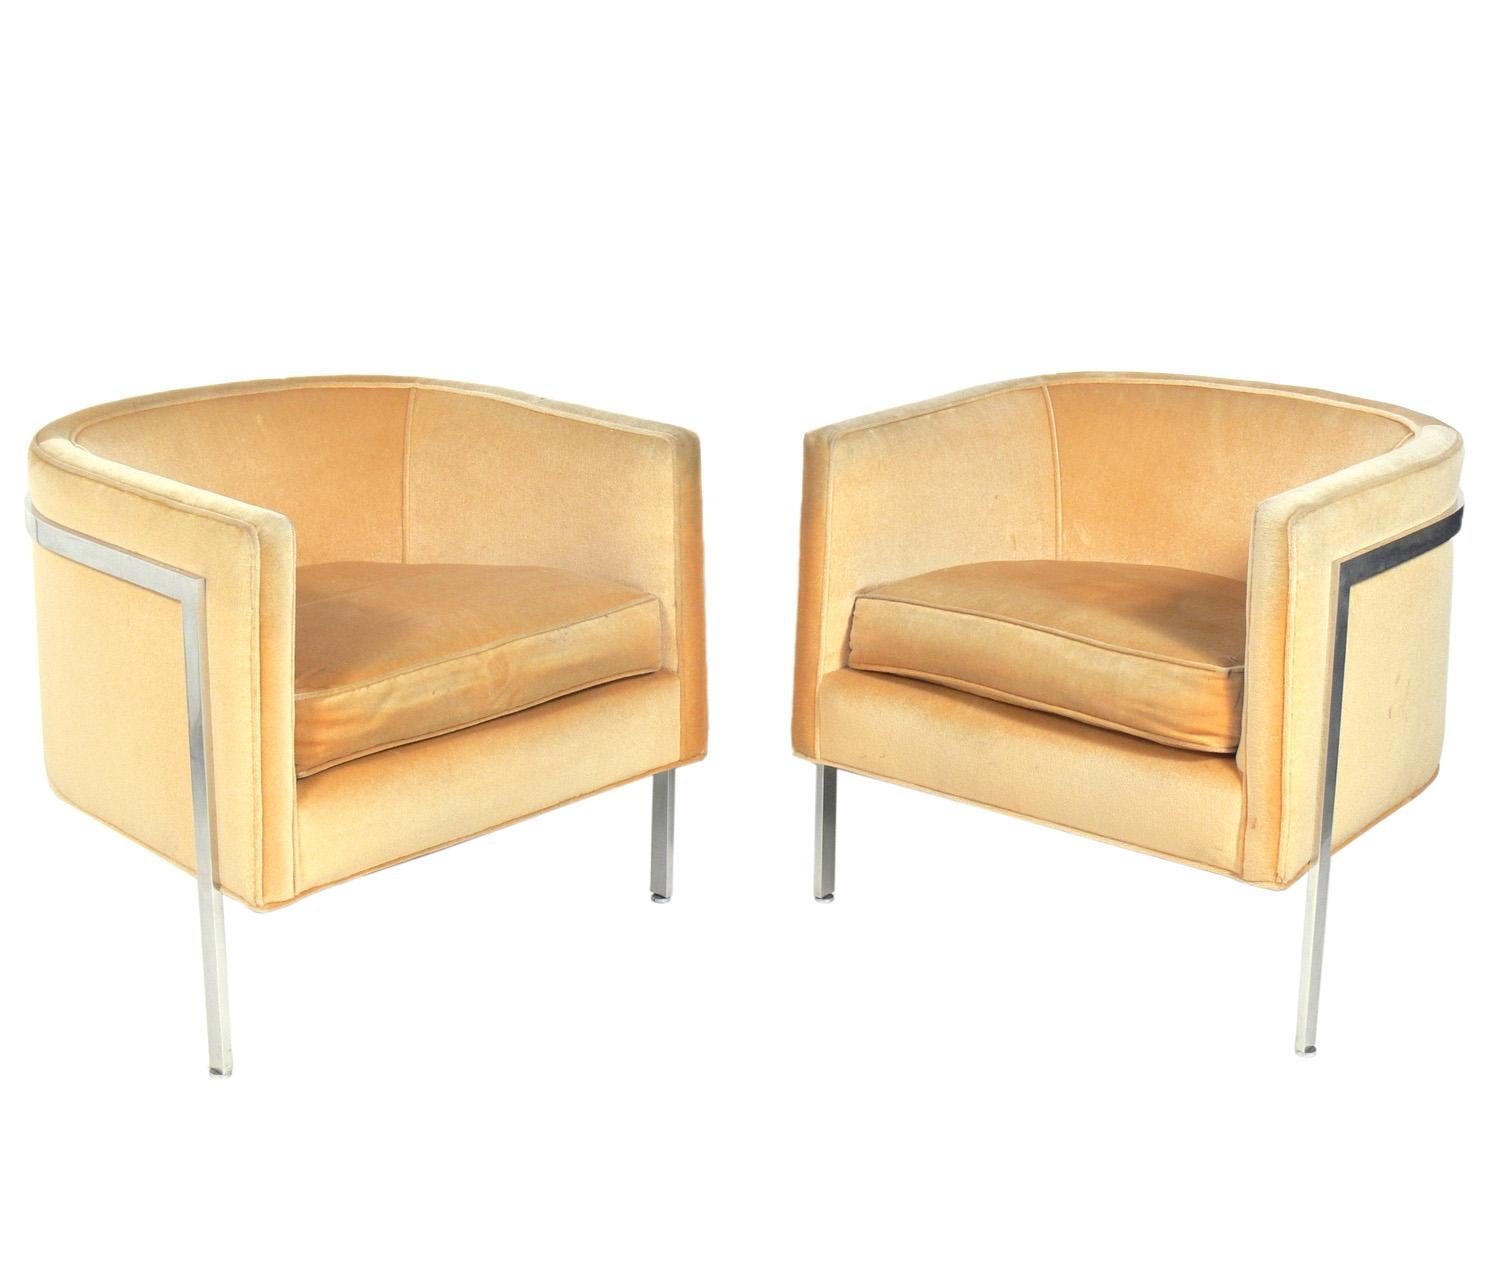 Pair of Curvaceous tub chairs by Harvey Probber, American, circa 1960s. These chairs are currently being restored and can be completed in your fabric. The price noted below includes reupholstery in your fabric and the frames being polished and